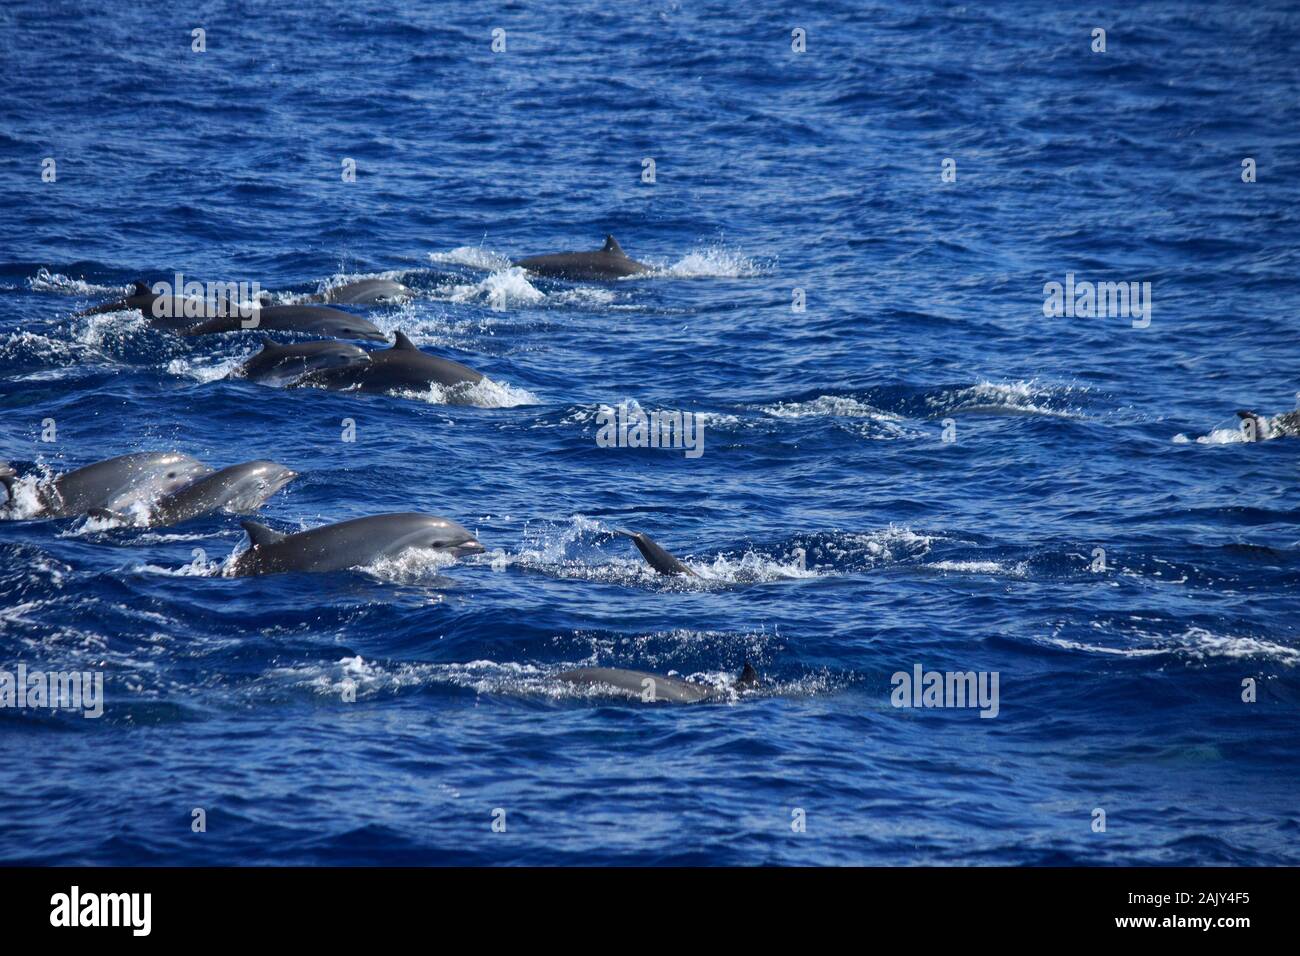 Pink bellied dolphins leaping in the Caribbean Sea Stock Photo